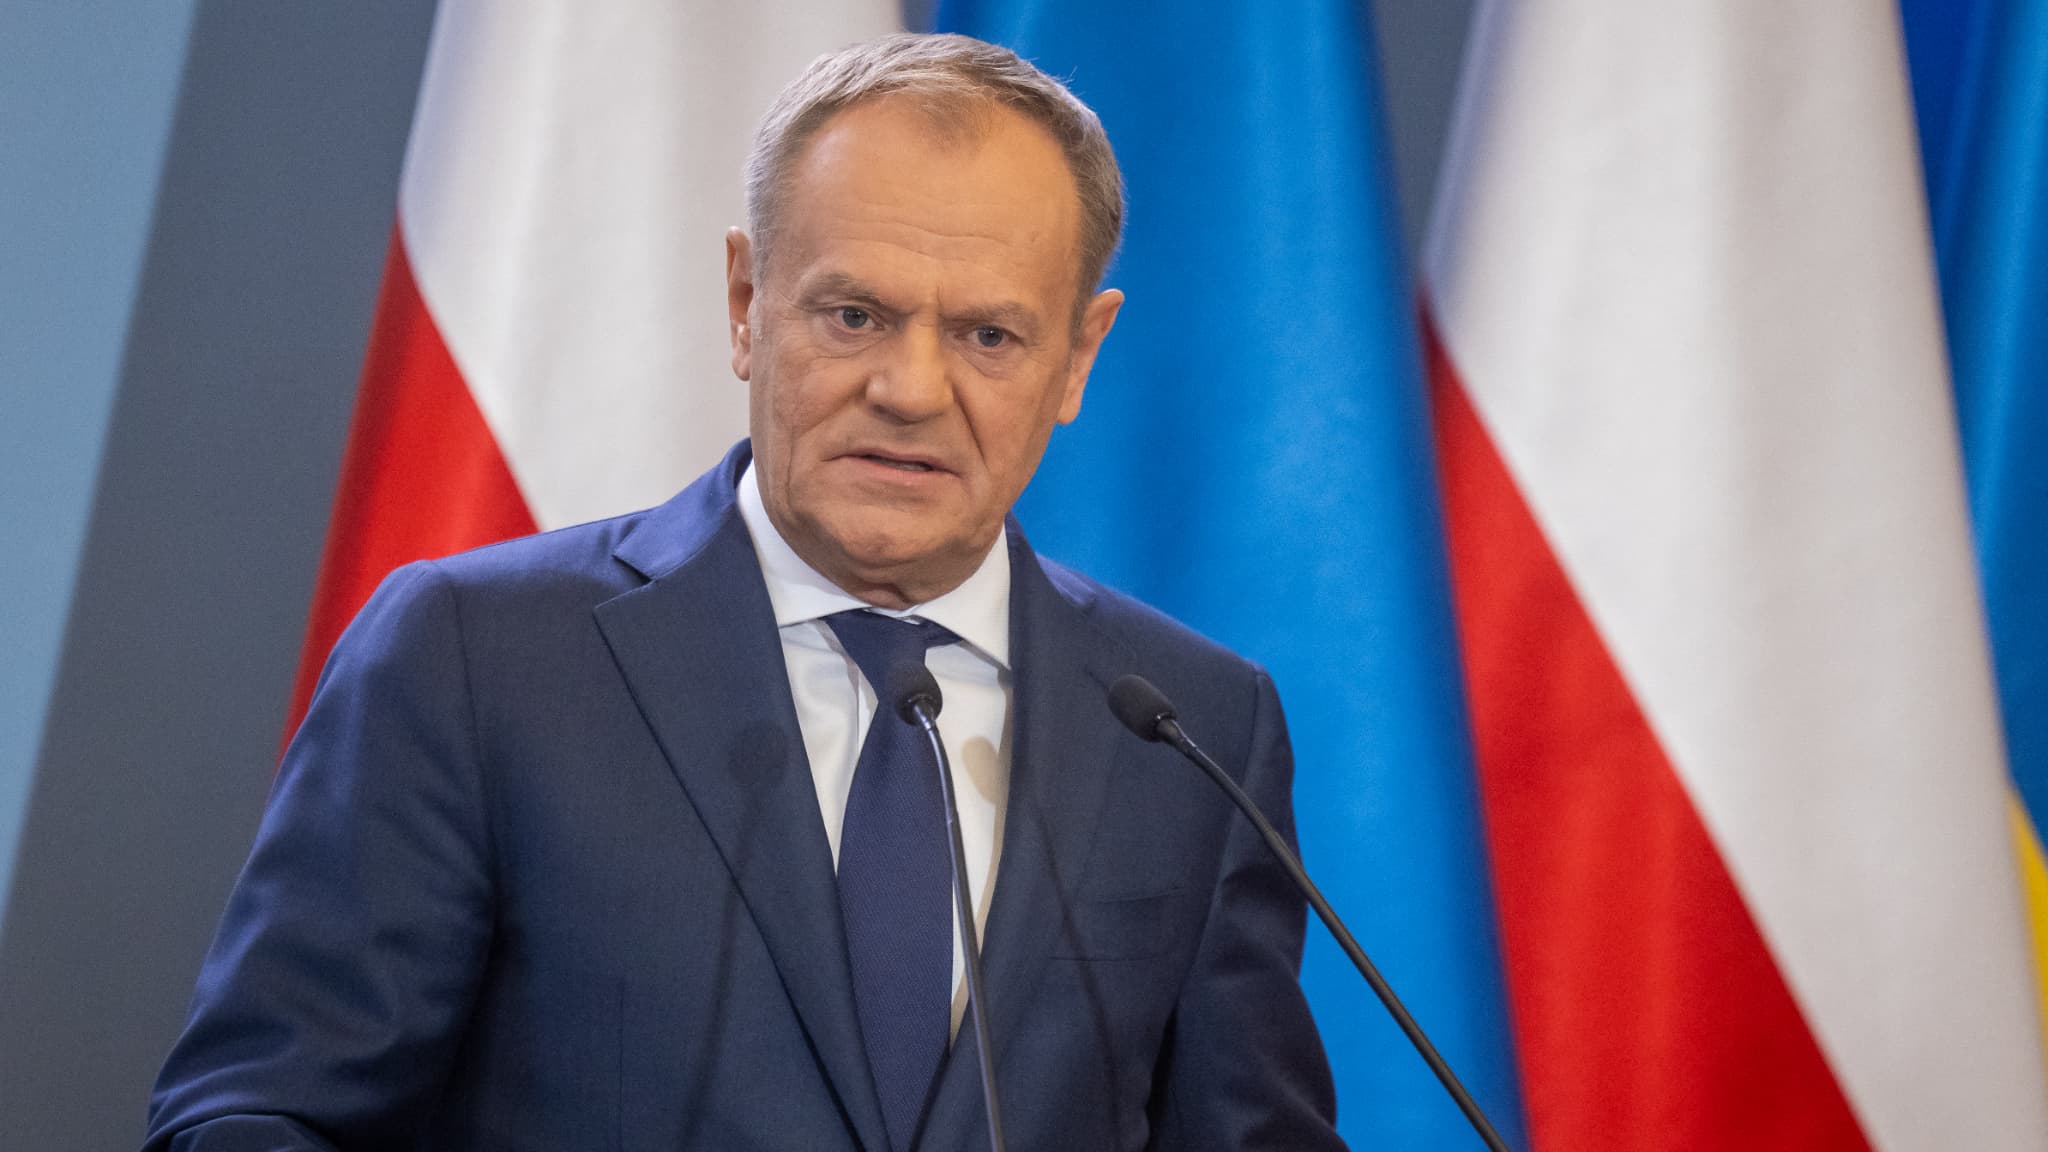 Poland's prime minister believes Europe is in a “pre-war era”.